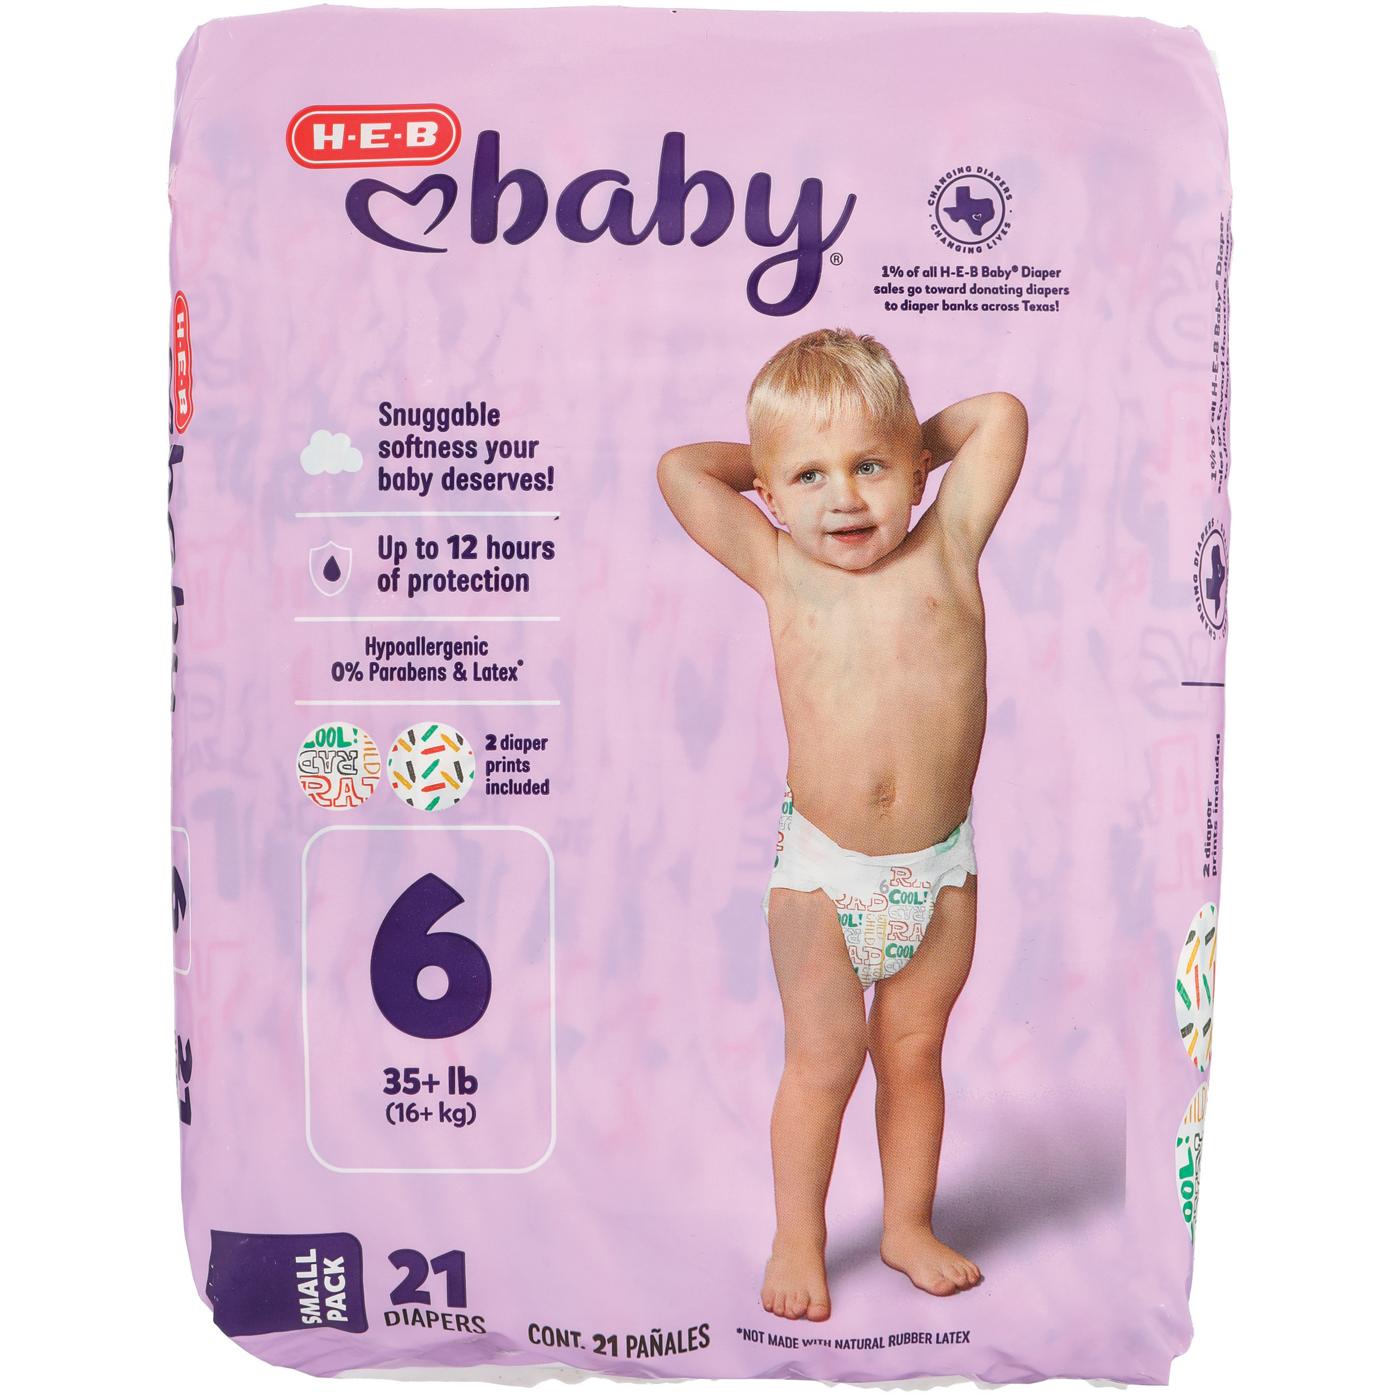 H-E-B Baby Small Pack Diapers - Size 6; image 1 of 6